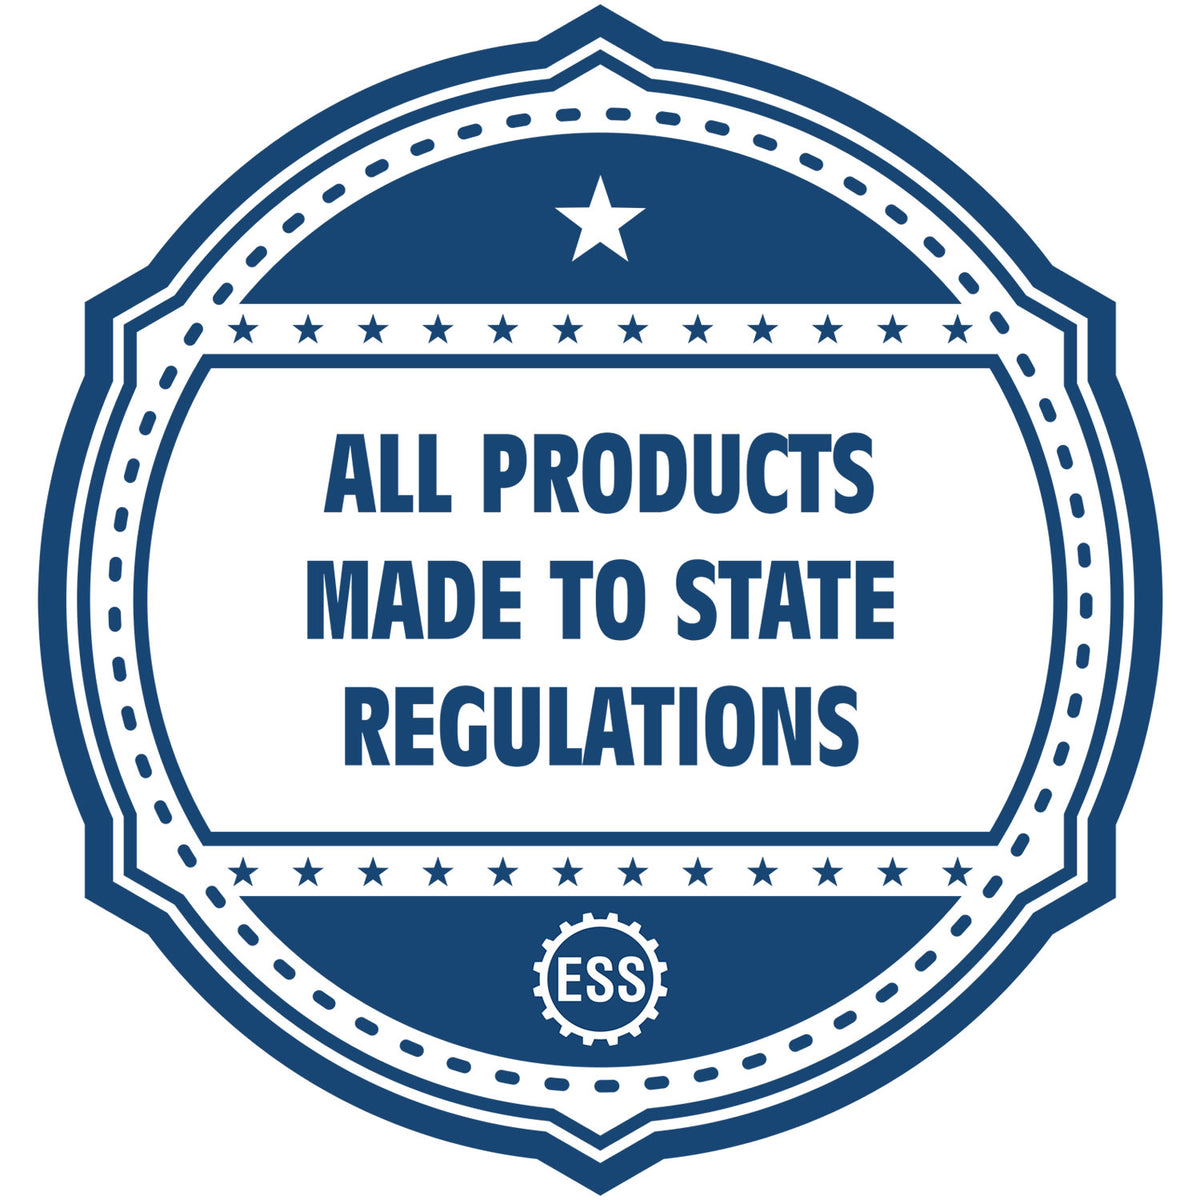 An icon or badge element for the Heavy-Duty Nebraska Rectangular Notary Stamp showing that this product is made in compliance with state regulations.